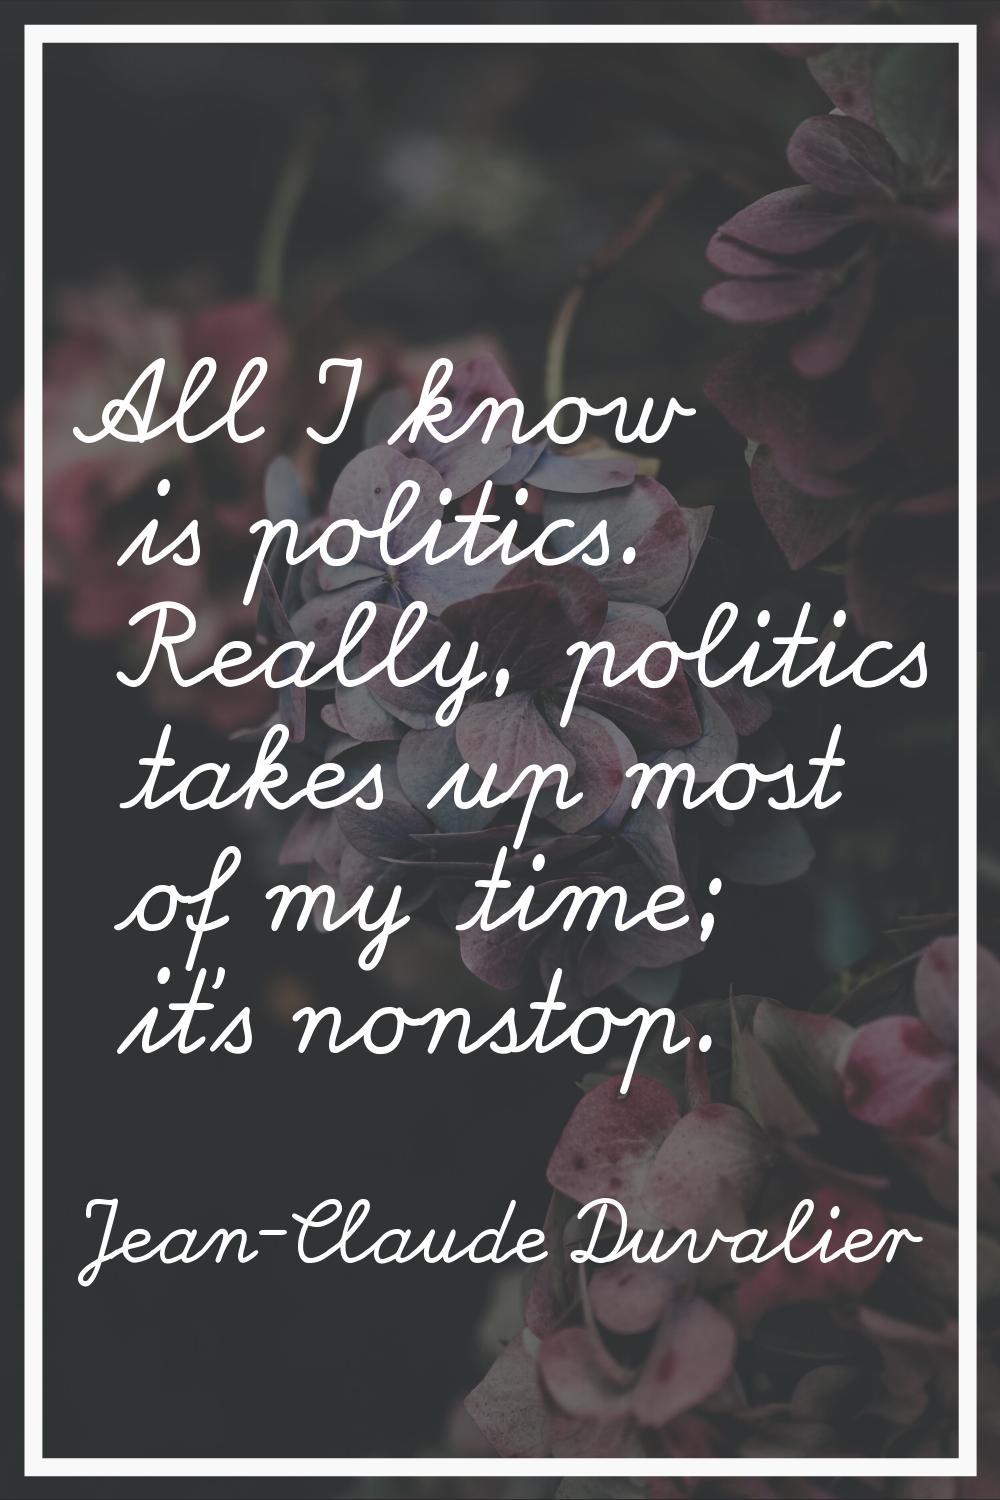 All I know is politics. Really, politics takes up most of my time; it's nonstop.